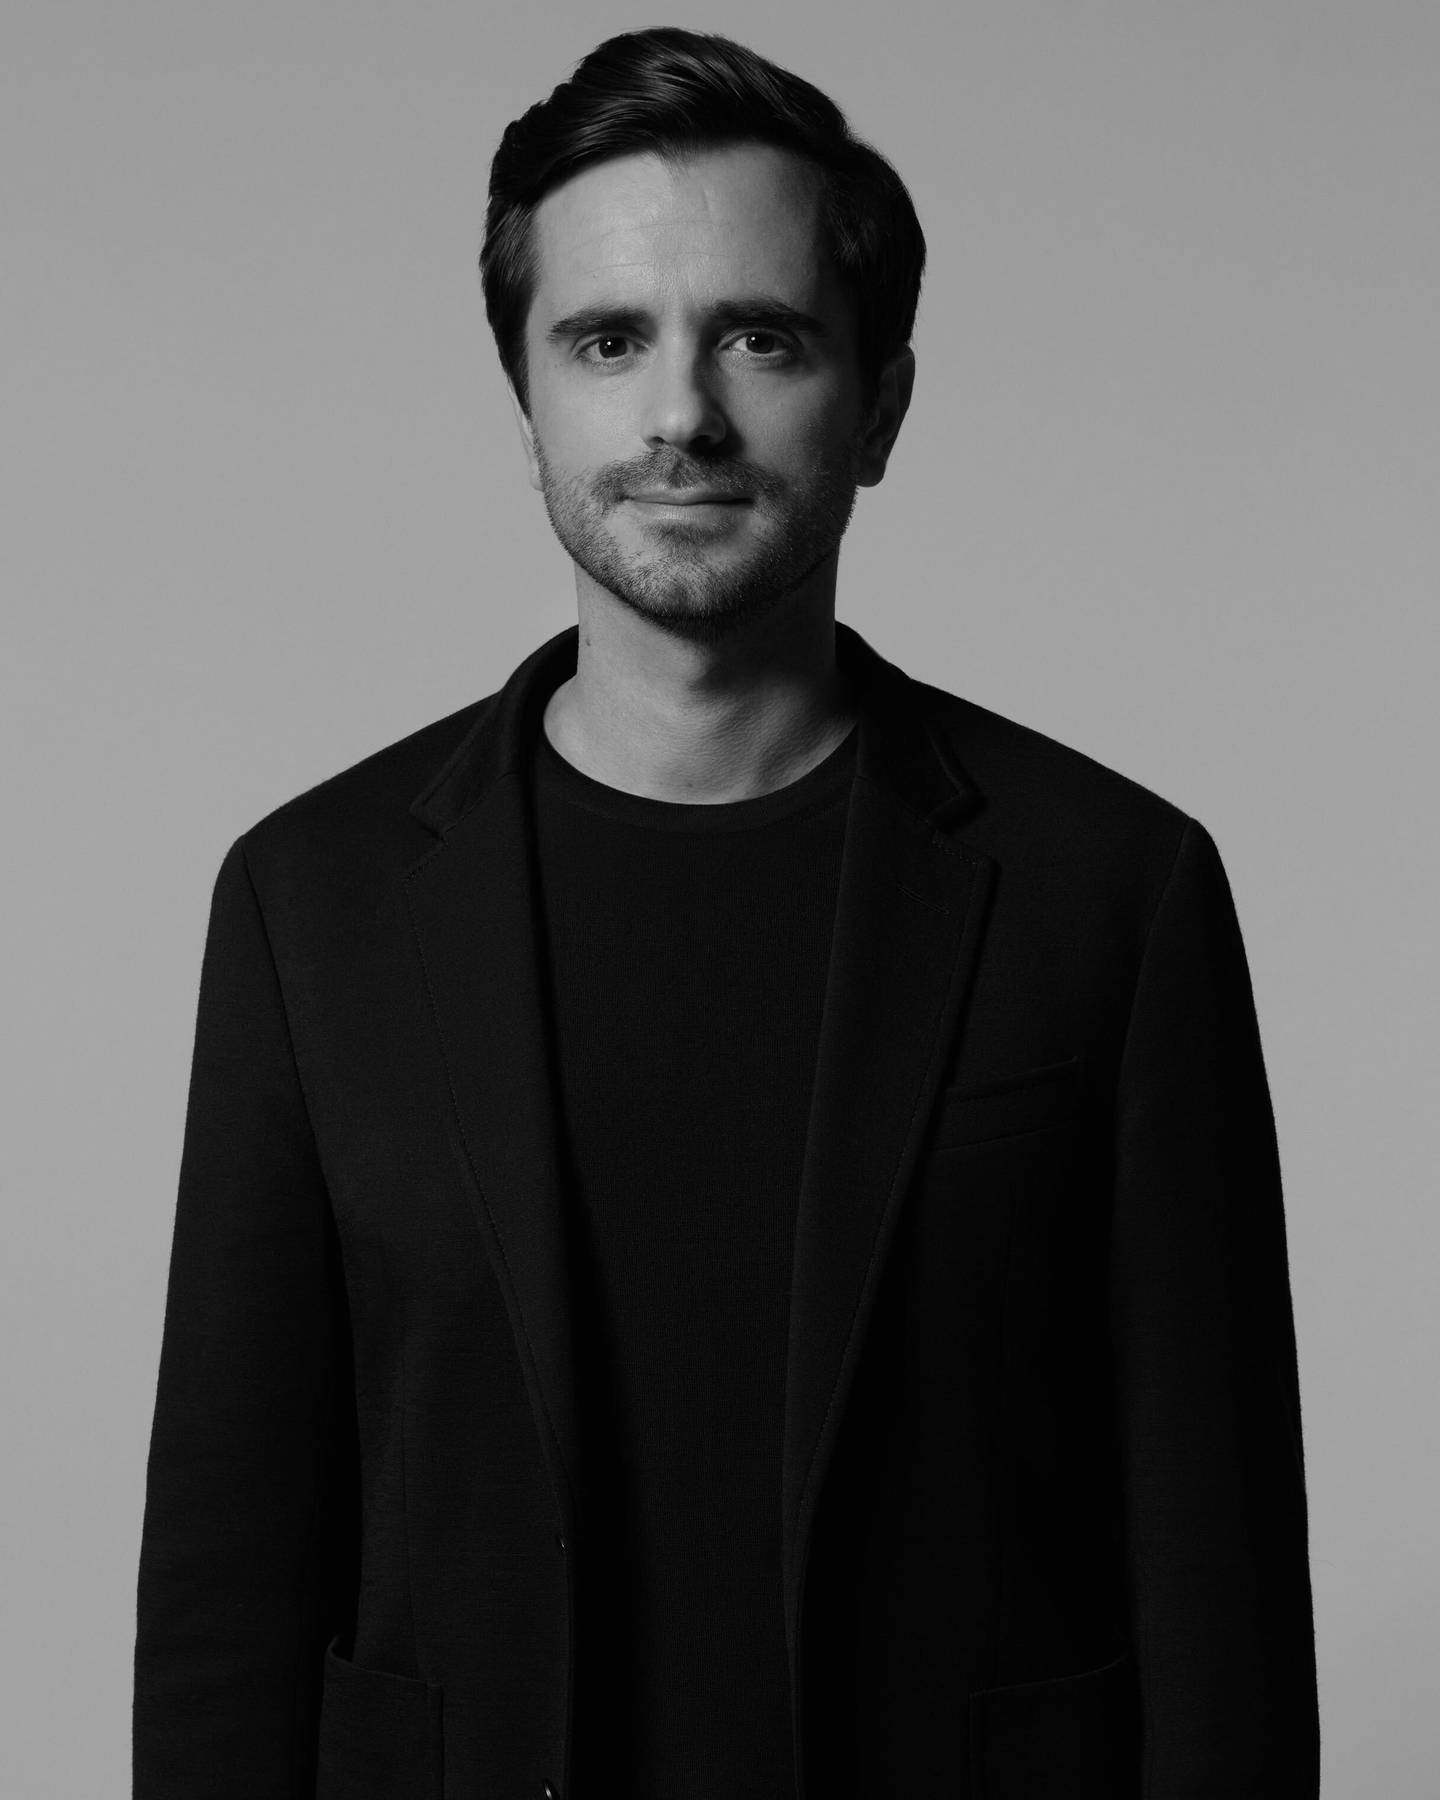 Laurent Malecaze, currently chief executive of British menswear label Dunhill, will replace Riccardo Bellini, as CEO of Chloe.